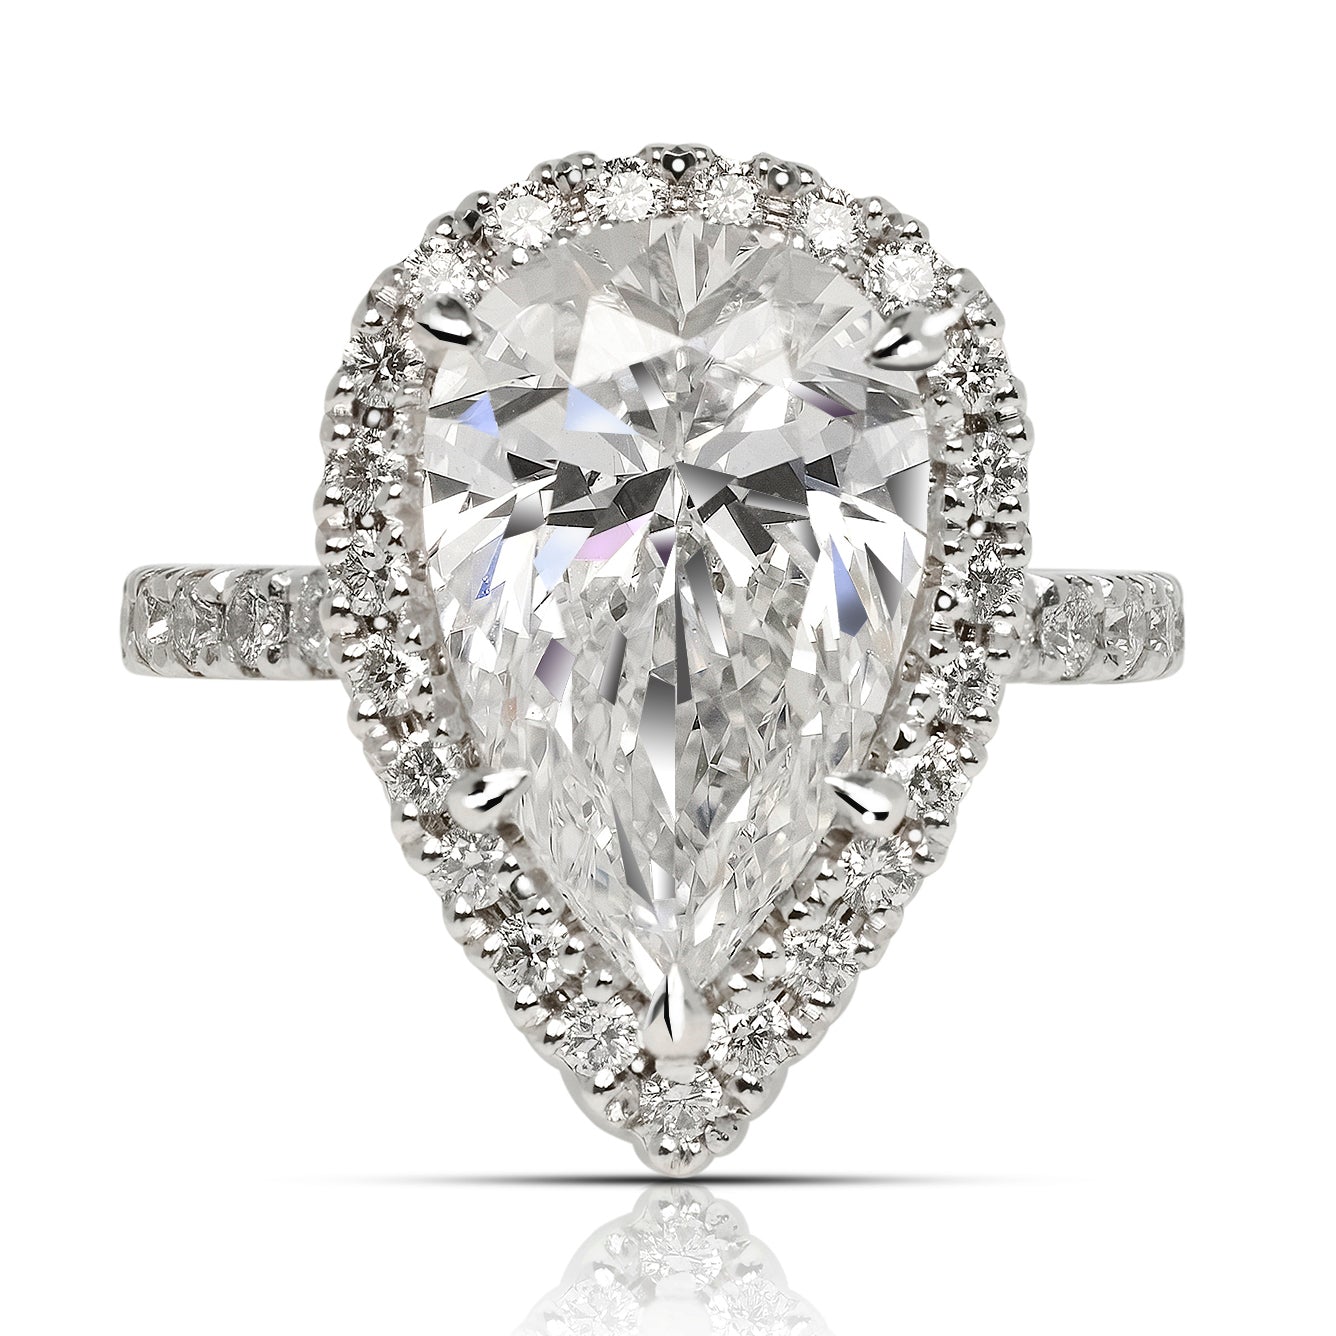 Diamond Ring Pear Shape Cut 4 Carat Halo Ring in Platinum Front View